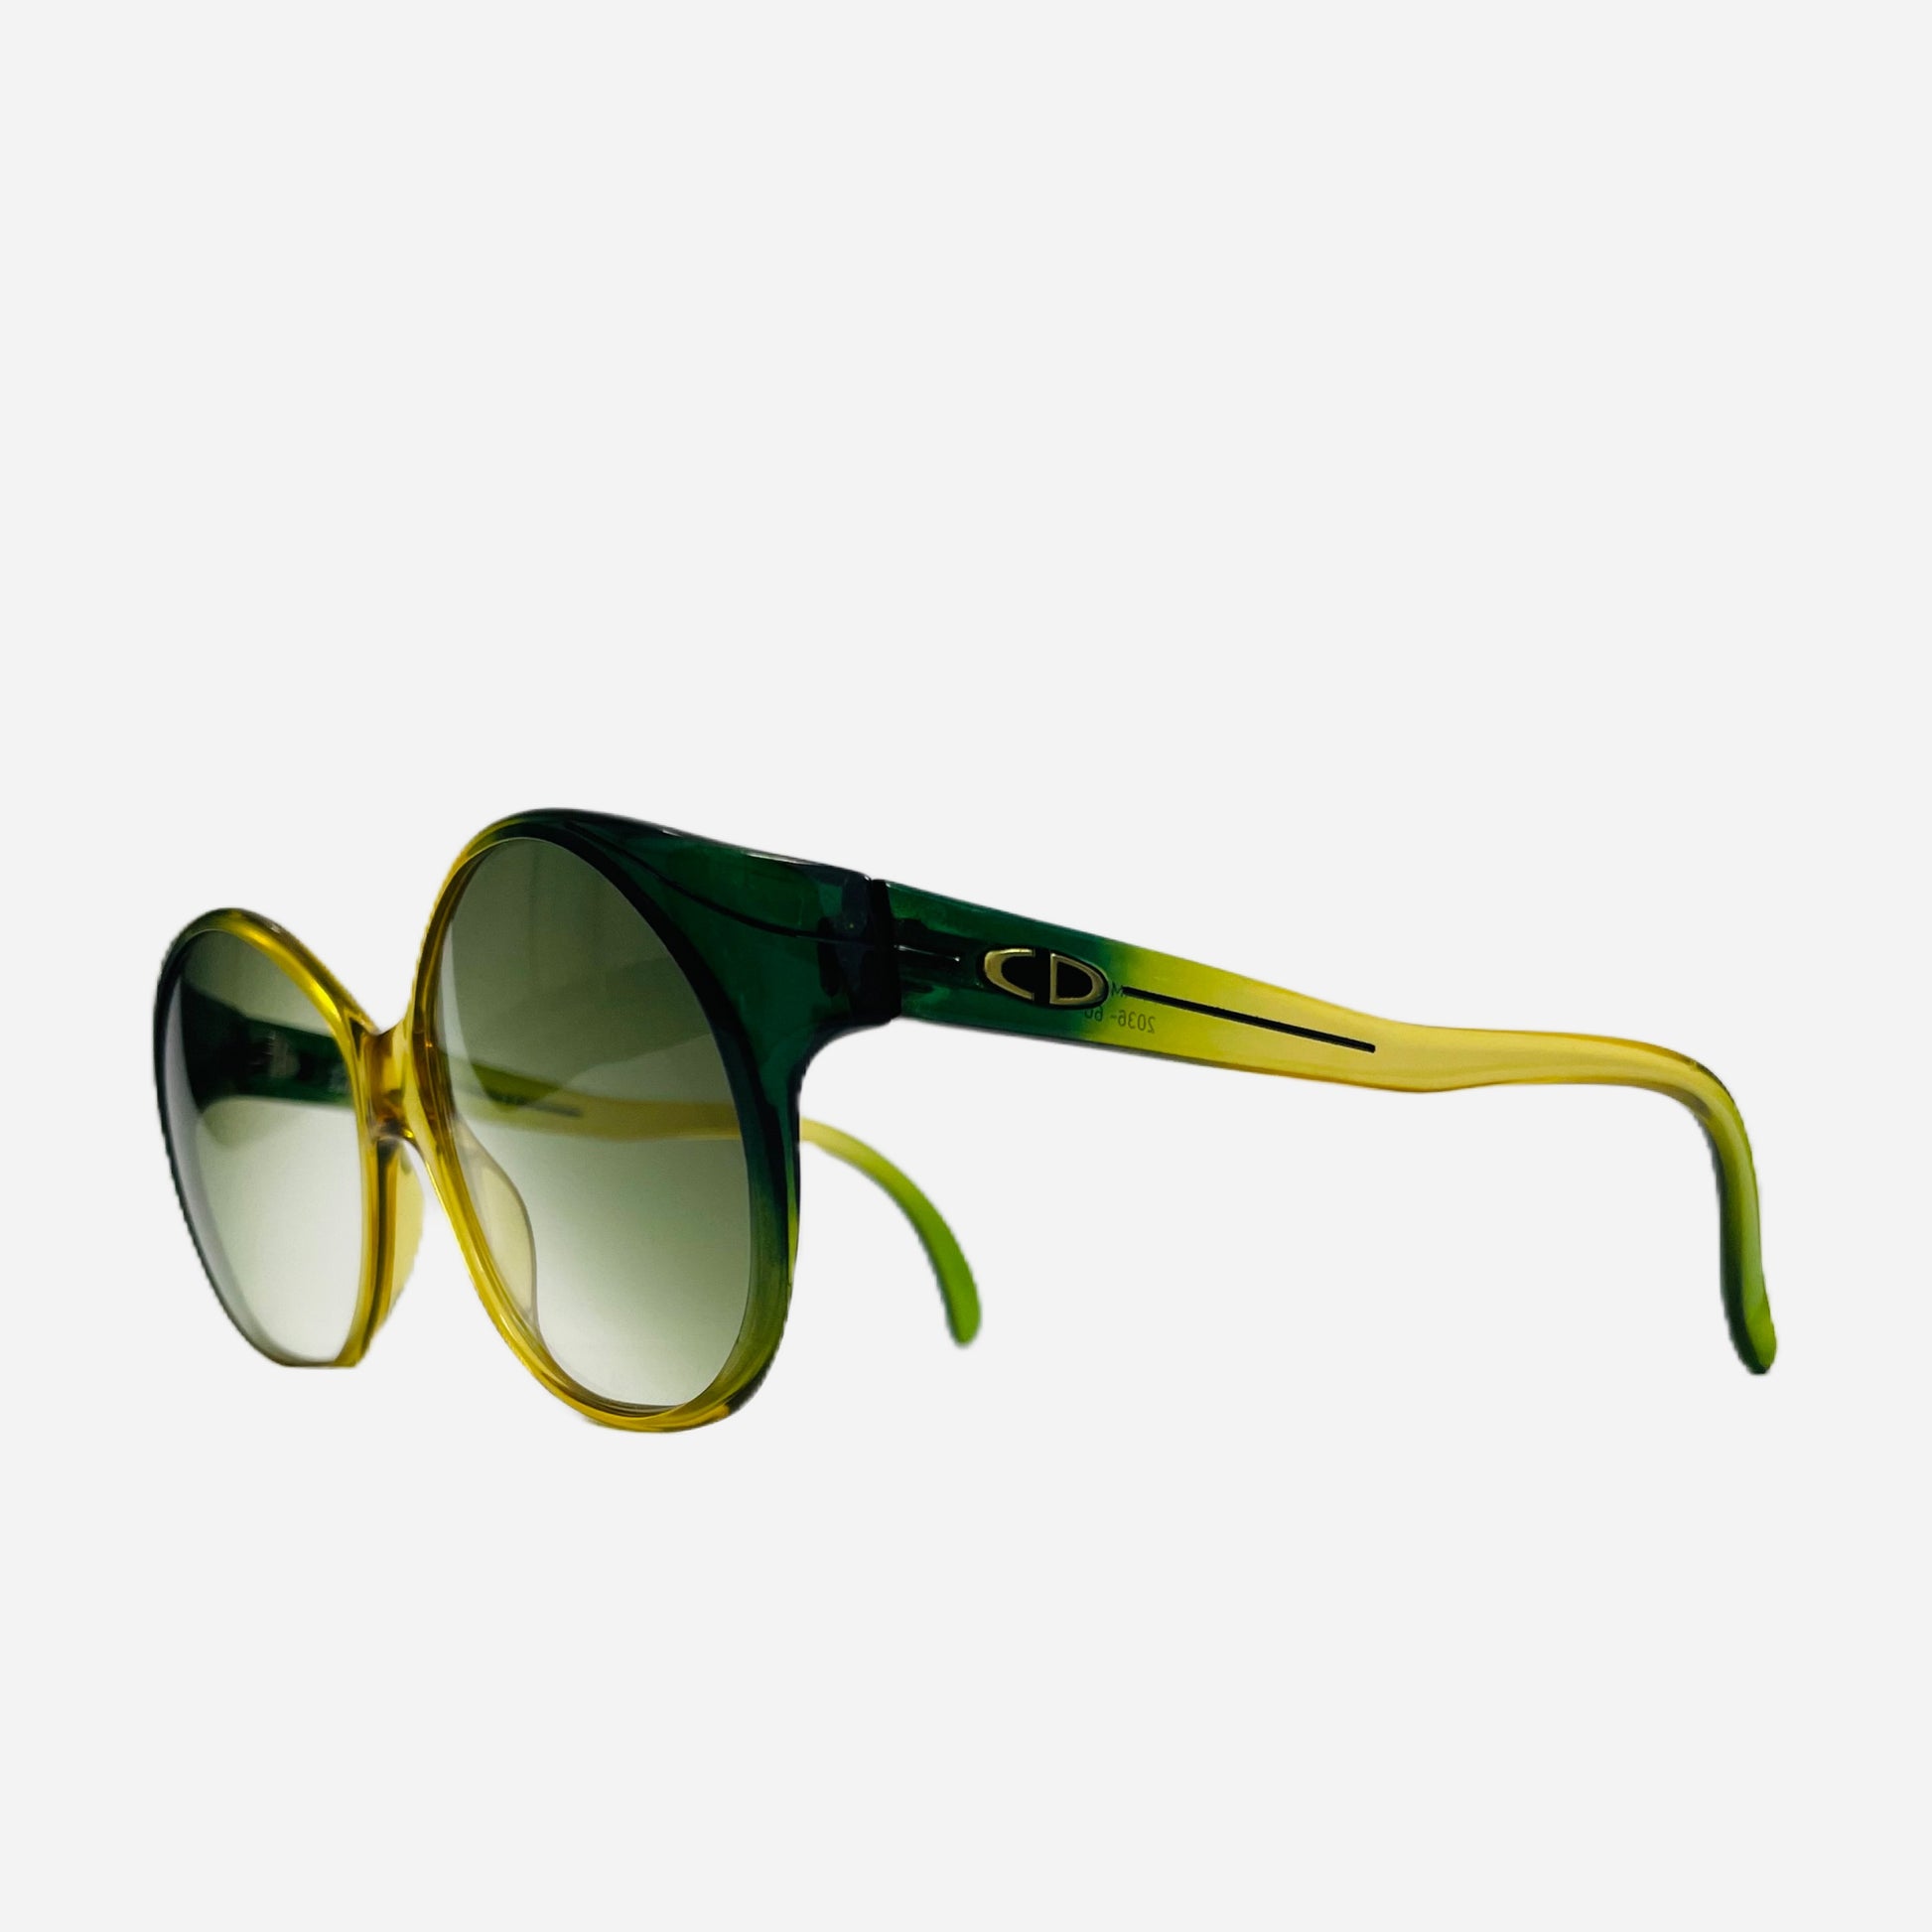 Vintage-Christian-Dior-Sonnenbrille-Sonnenbrille-2036-Optyl-the-seekers-detail-2